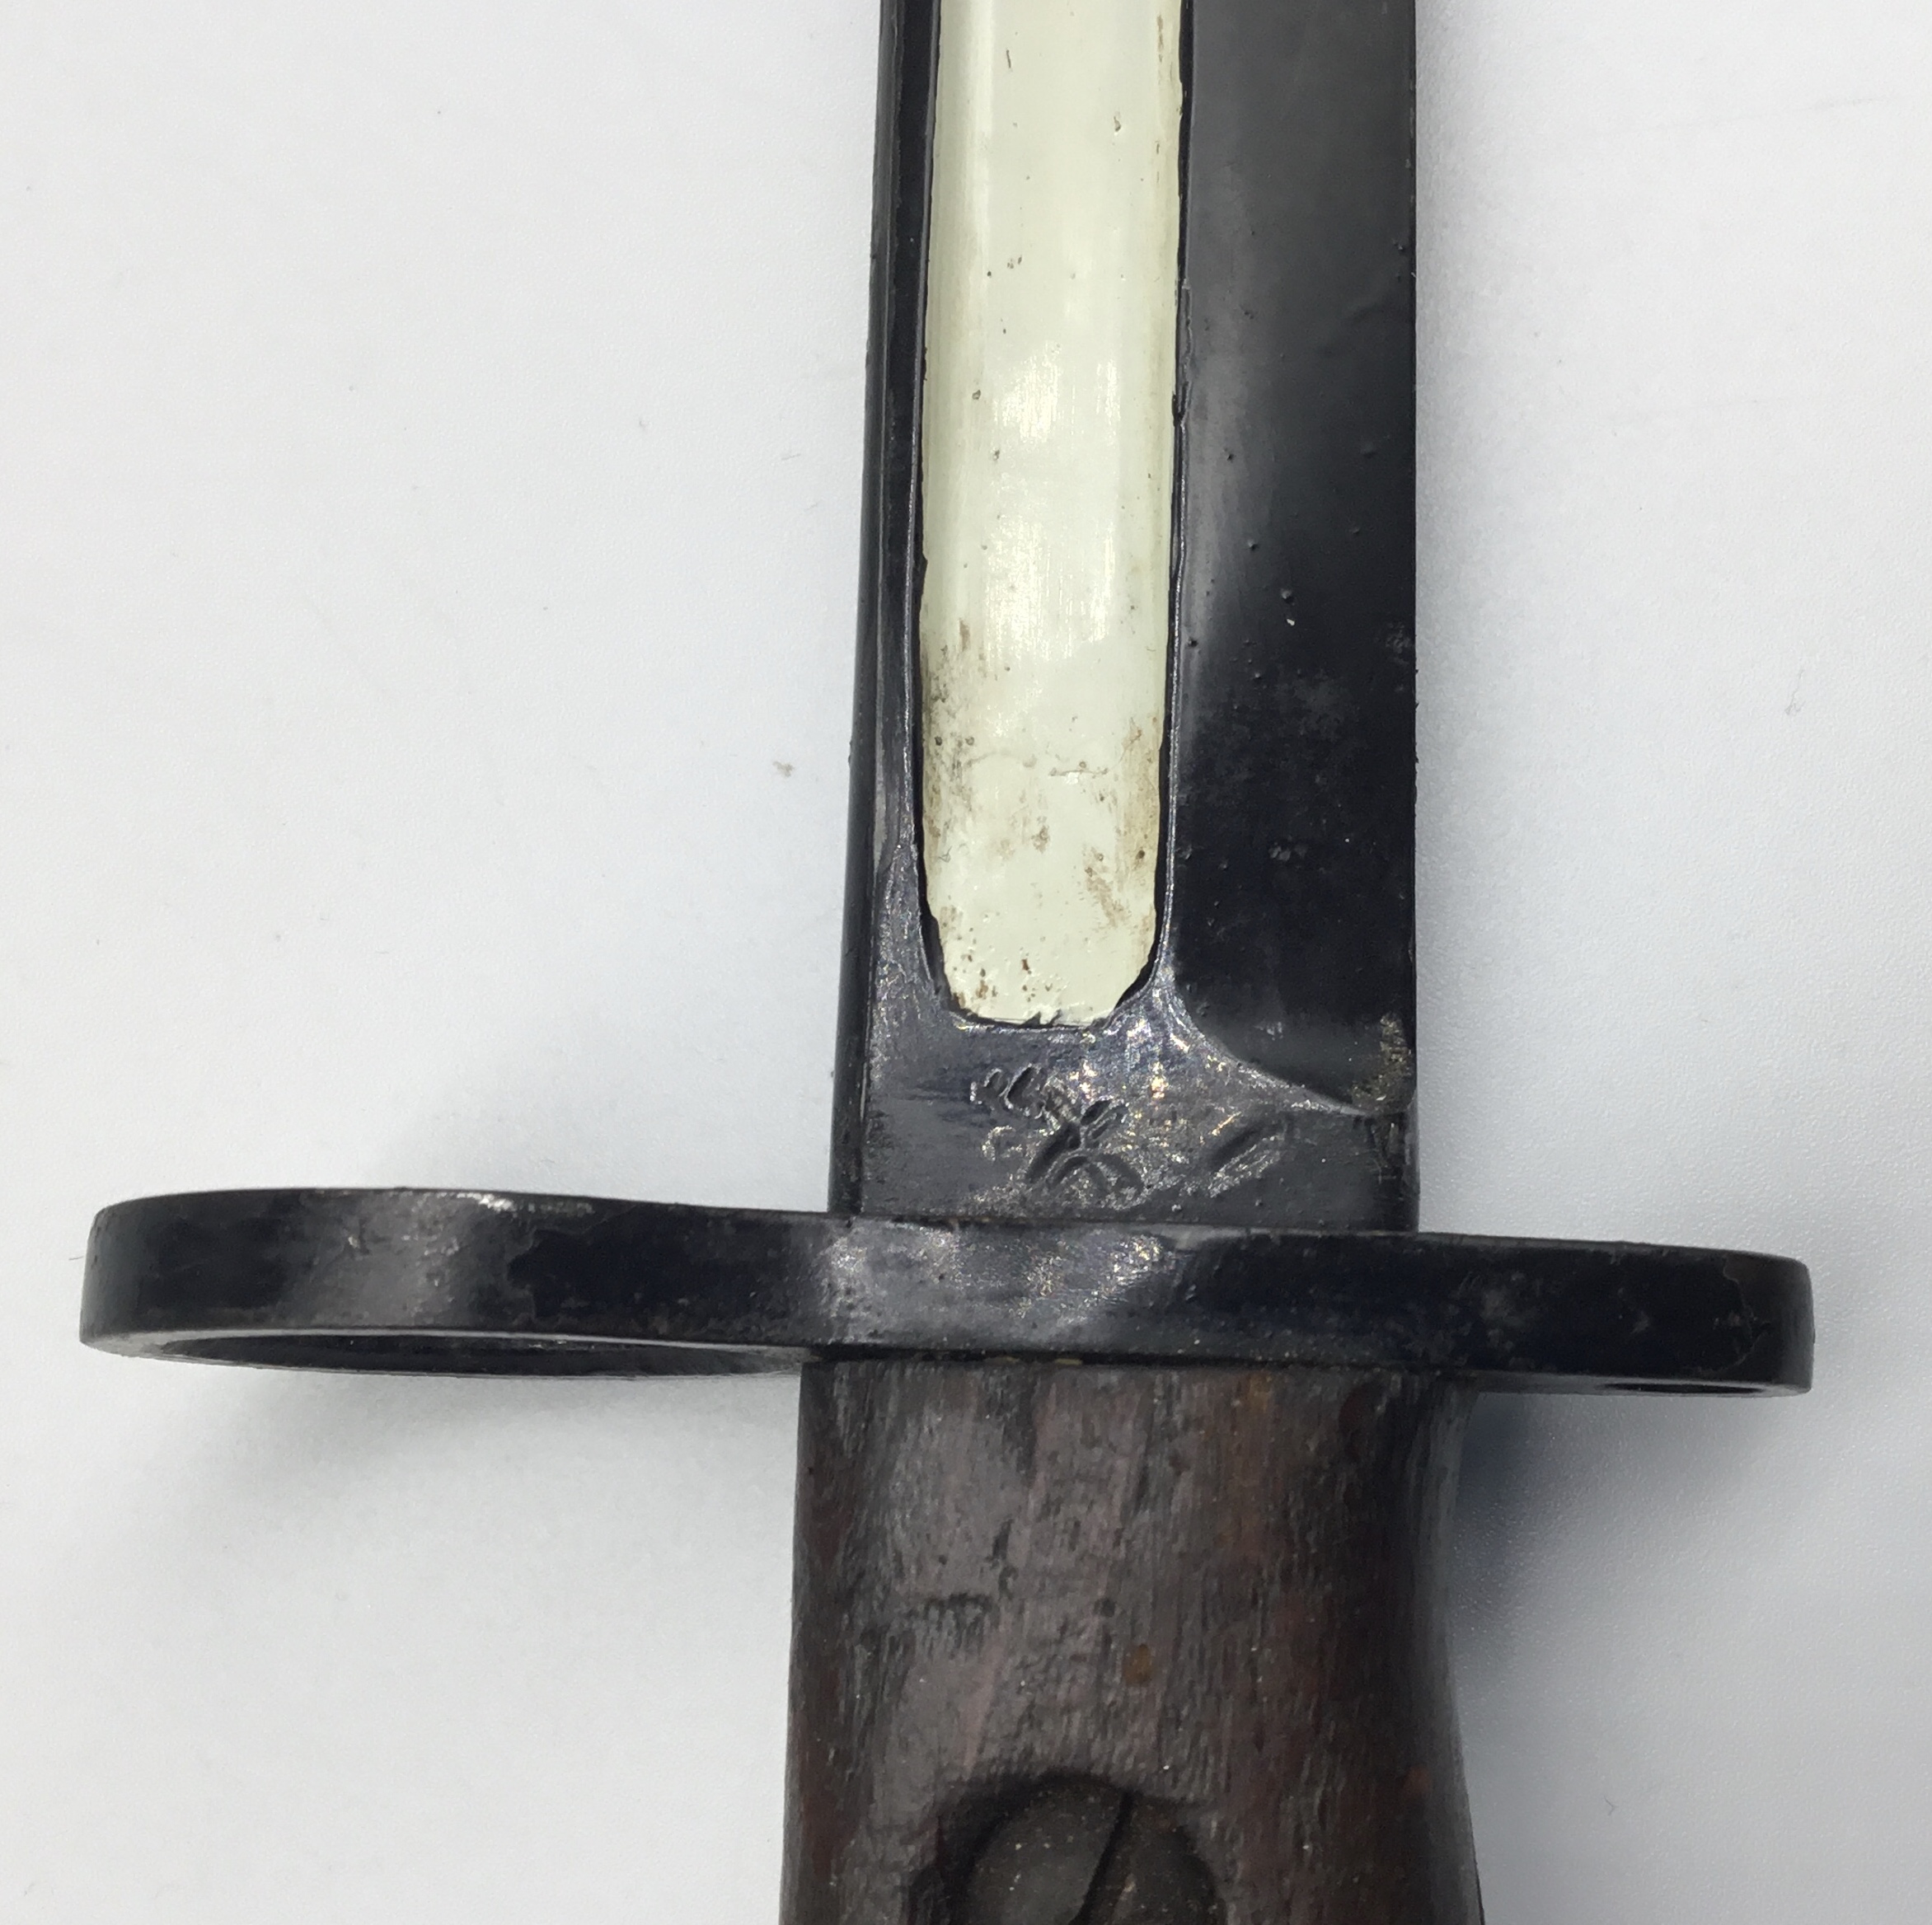 British No.5 MK1 Jungle Carbine bayonet, by the Wilkinson Sword Company. Complete with scabbard. - Image 4 of 6